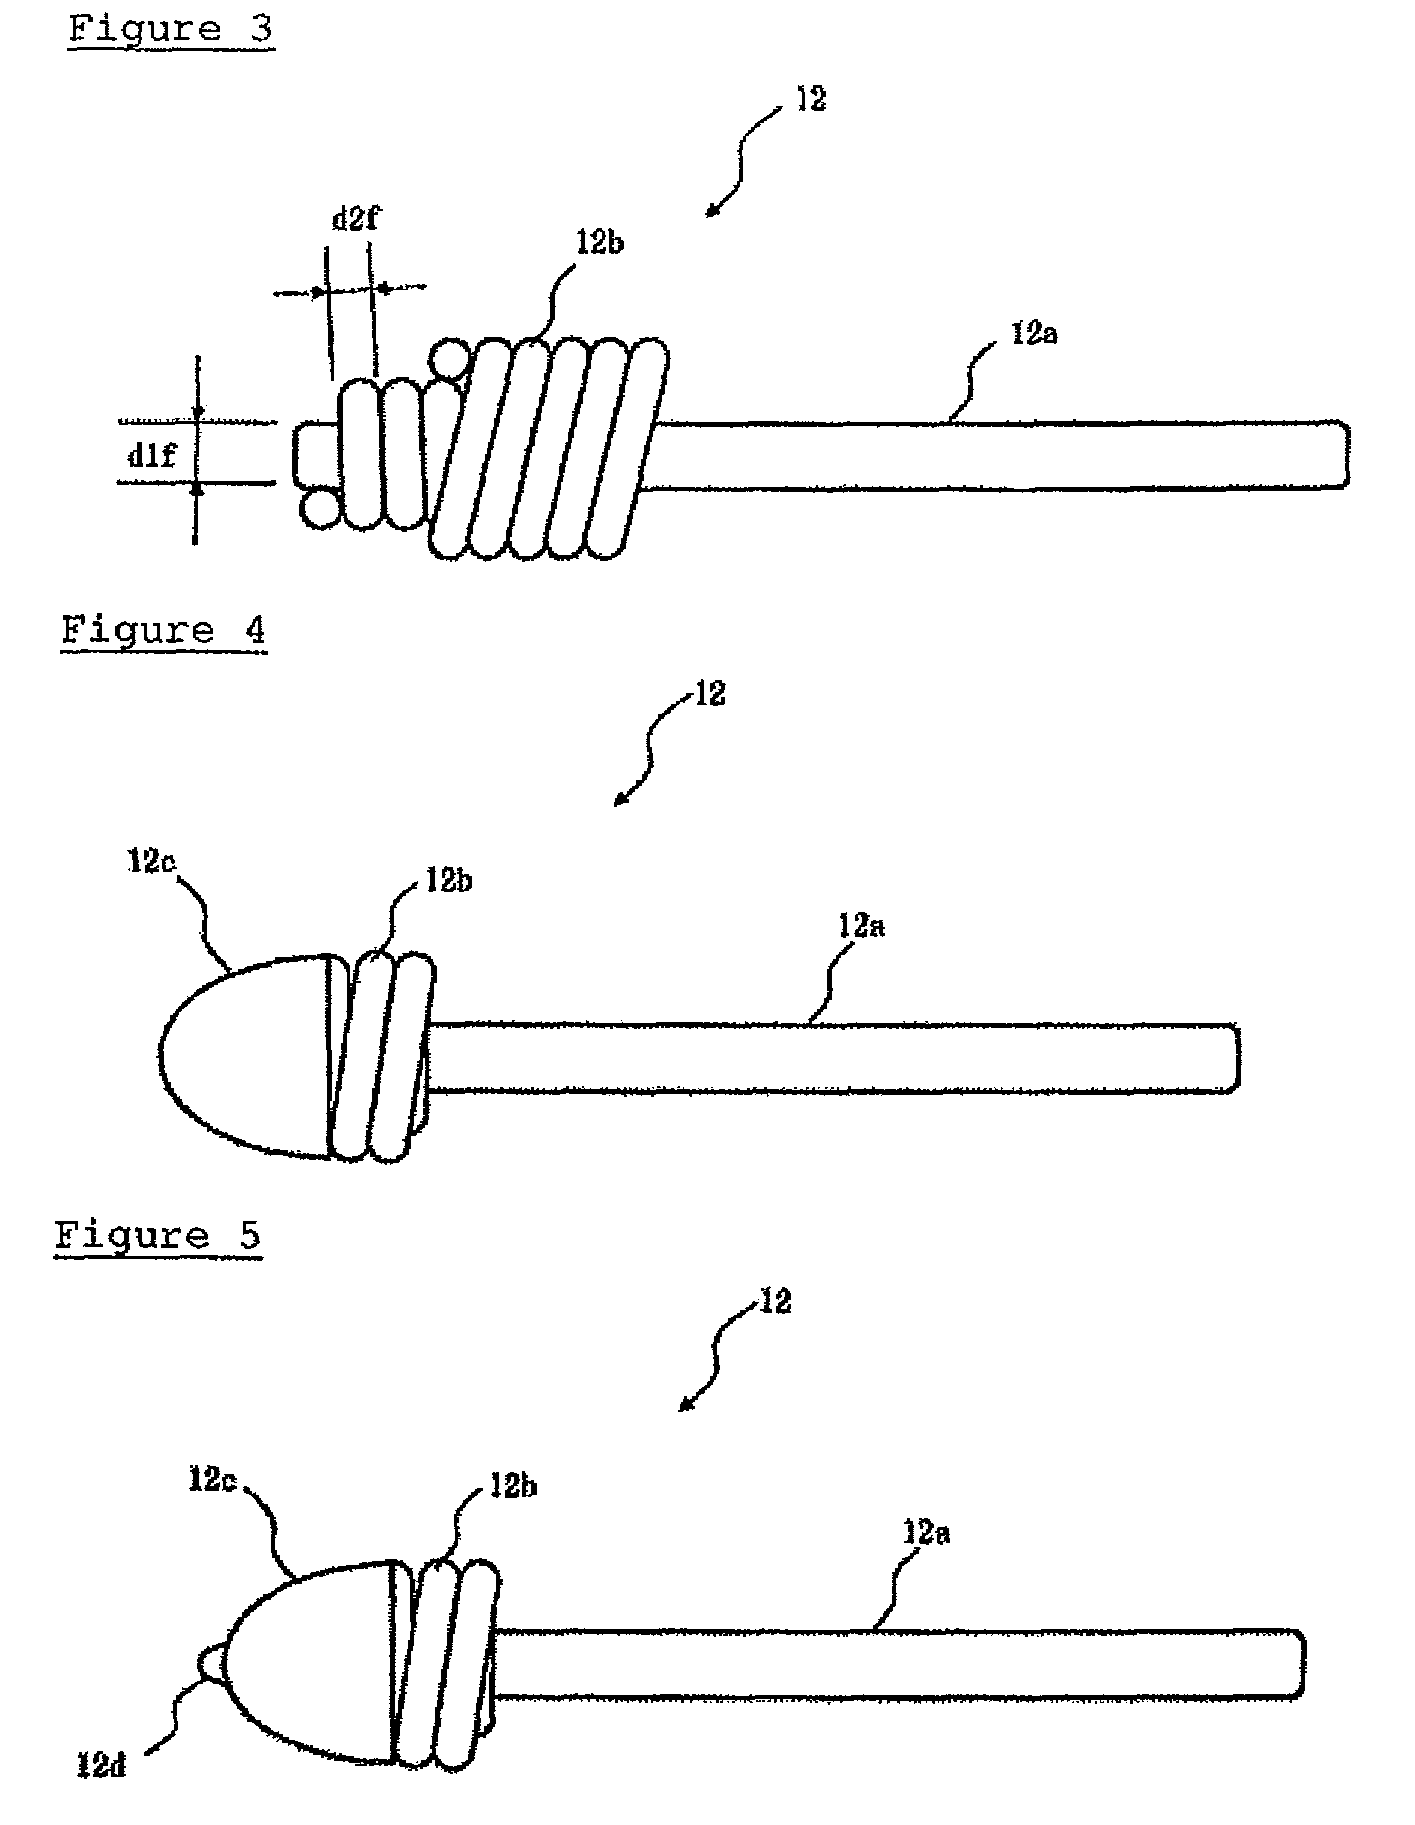 Discharge lamp with a reflective mirror with optimized electrode configuration